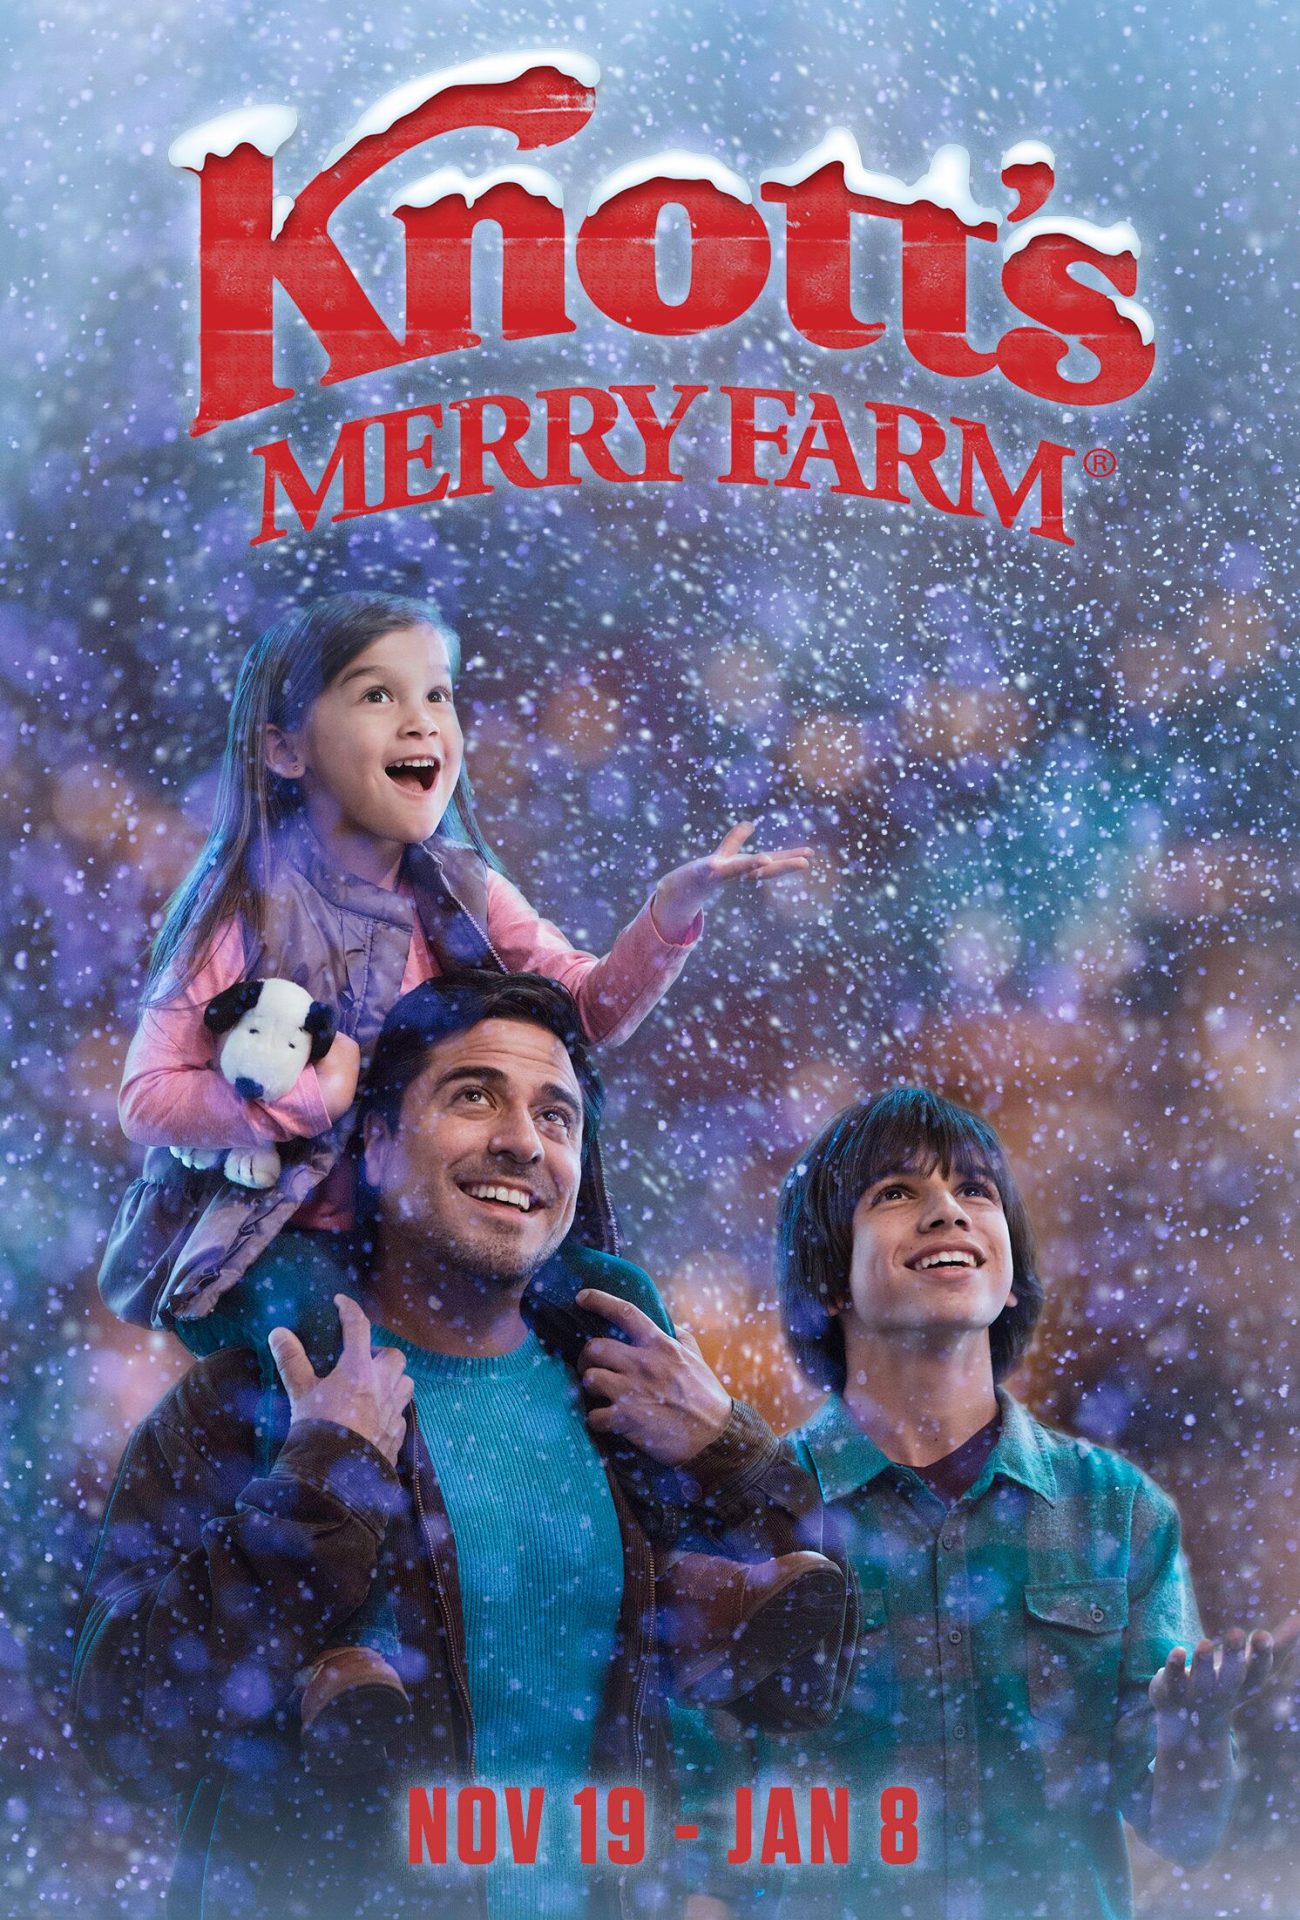 See what is new at Knott's Berry Farm for Merry Farm!